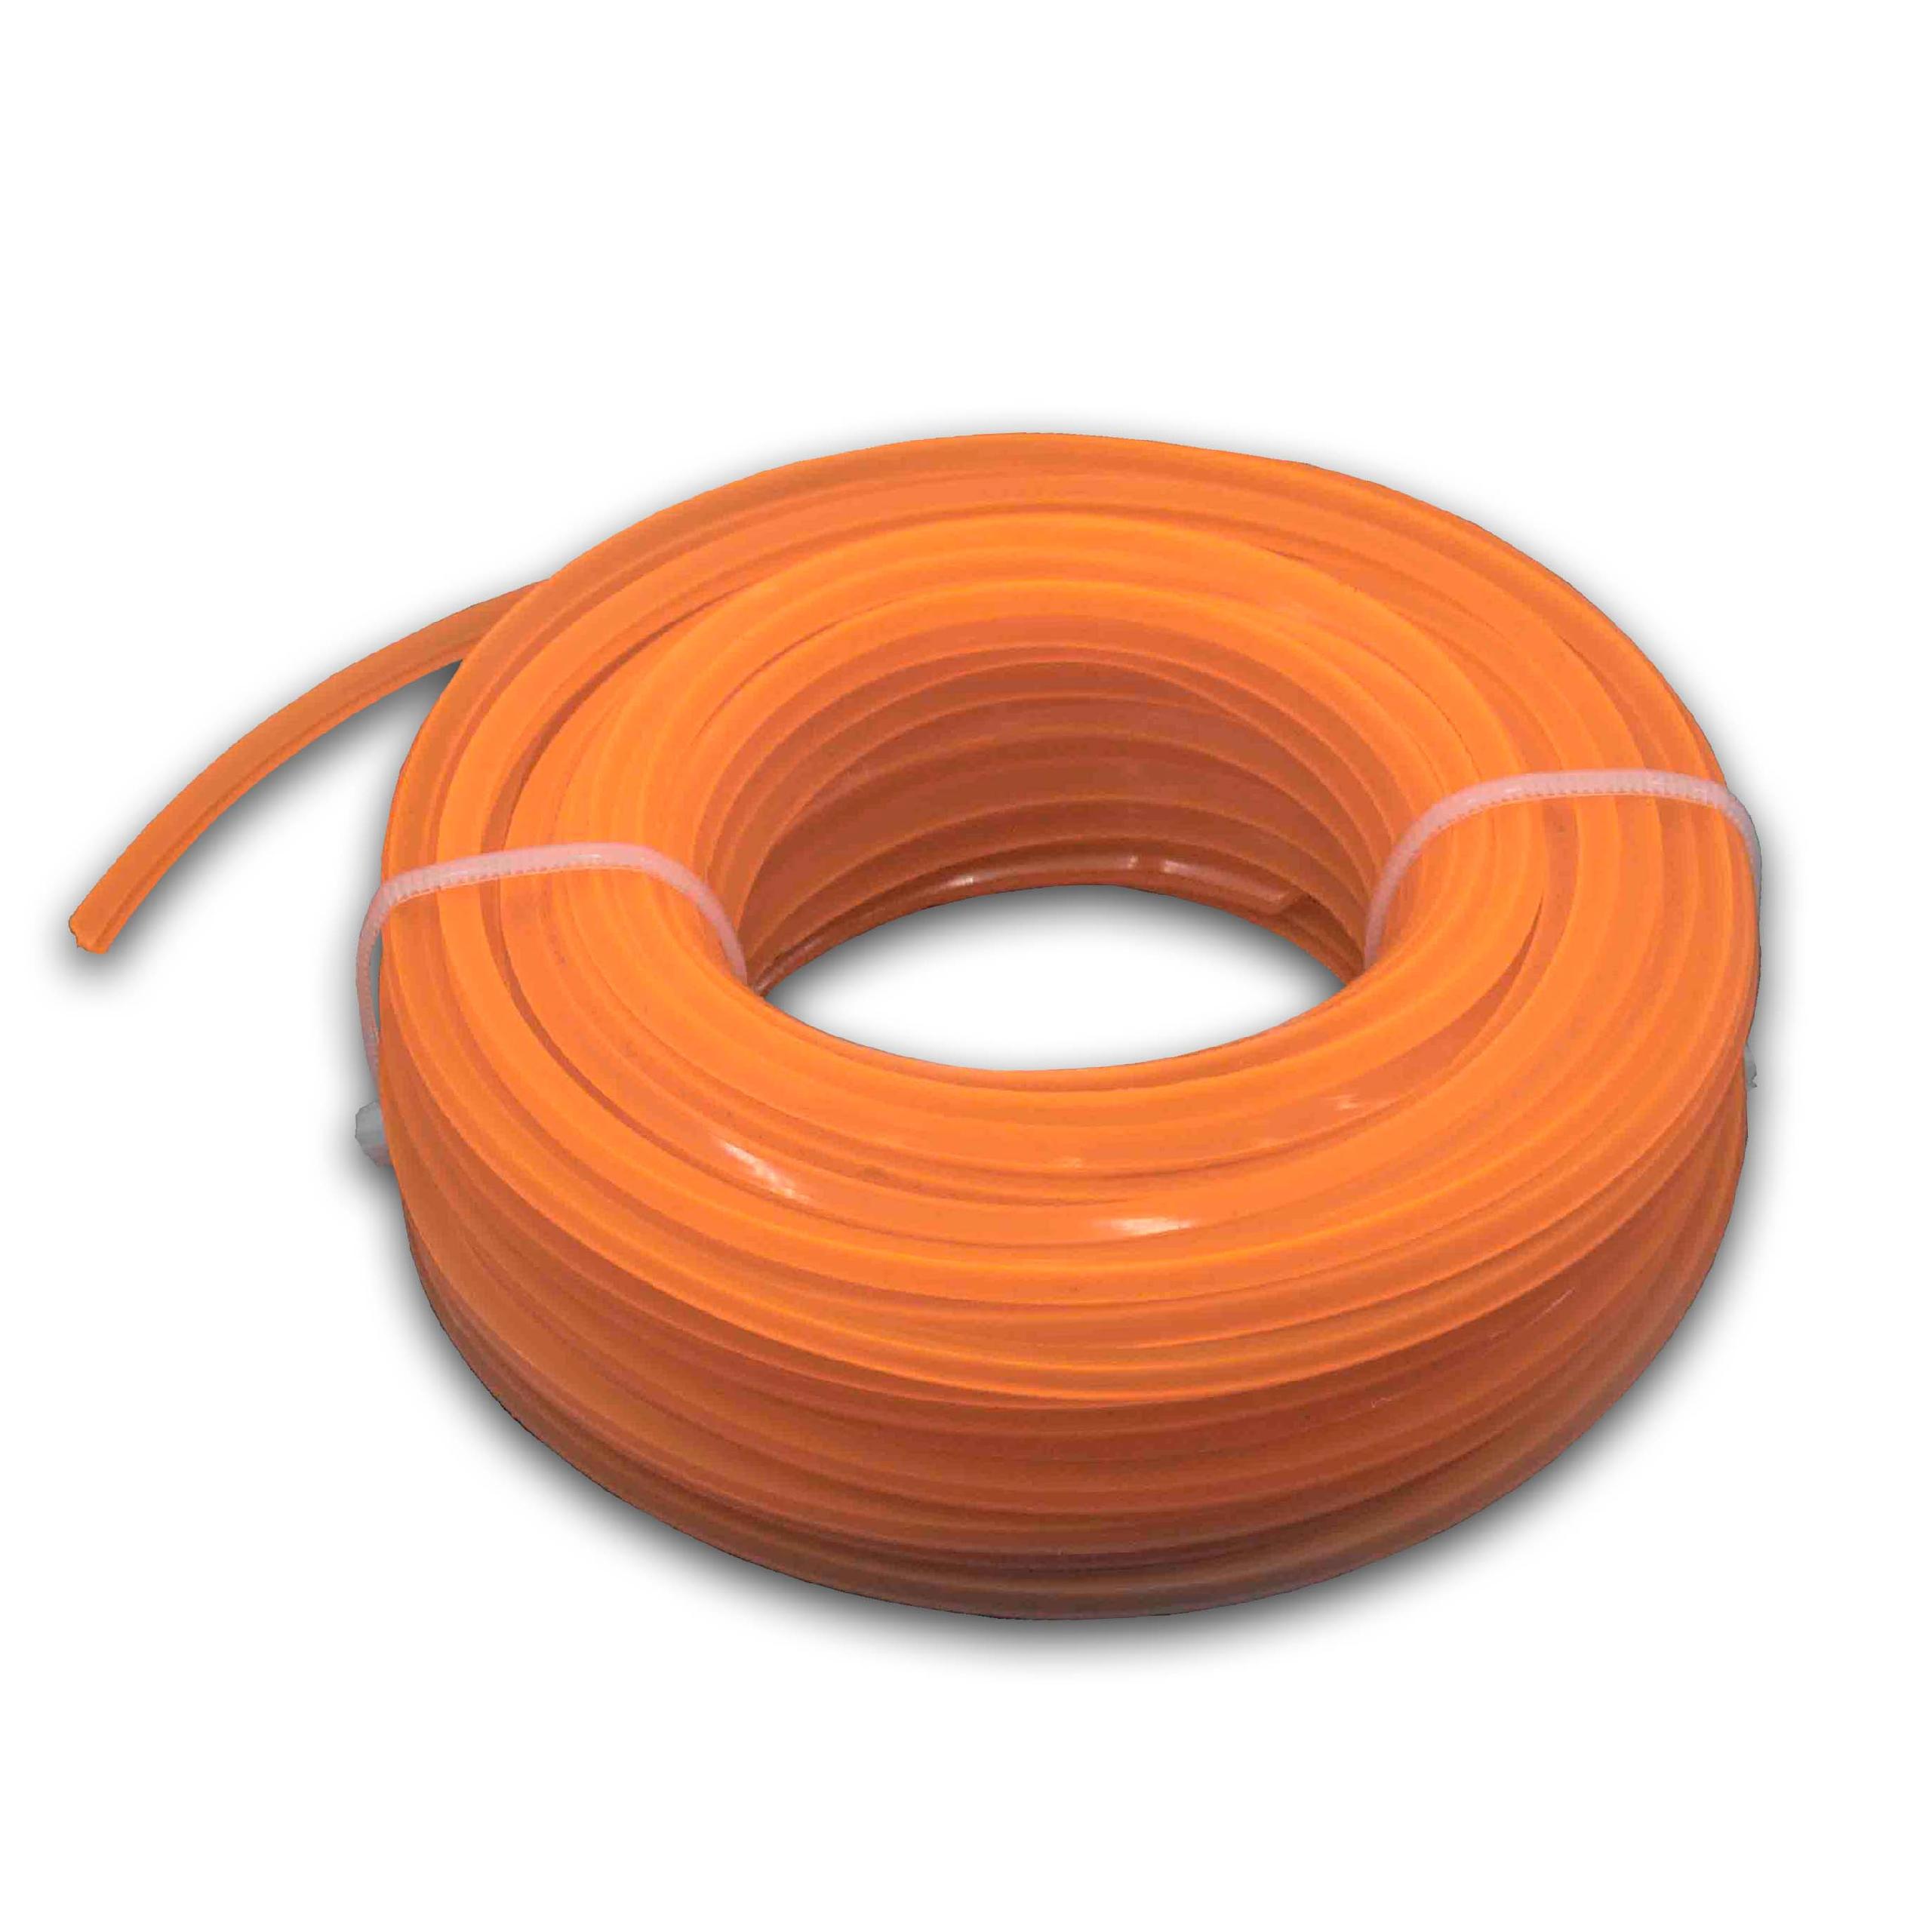 Line suitable for Bosch Makita Lawn Mower, Grass Trimmer - Trimmer Line, Orange, 2.4 mm x 15 m, Square